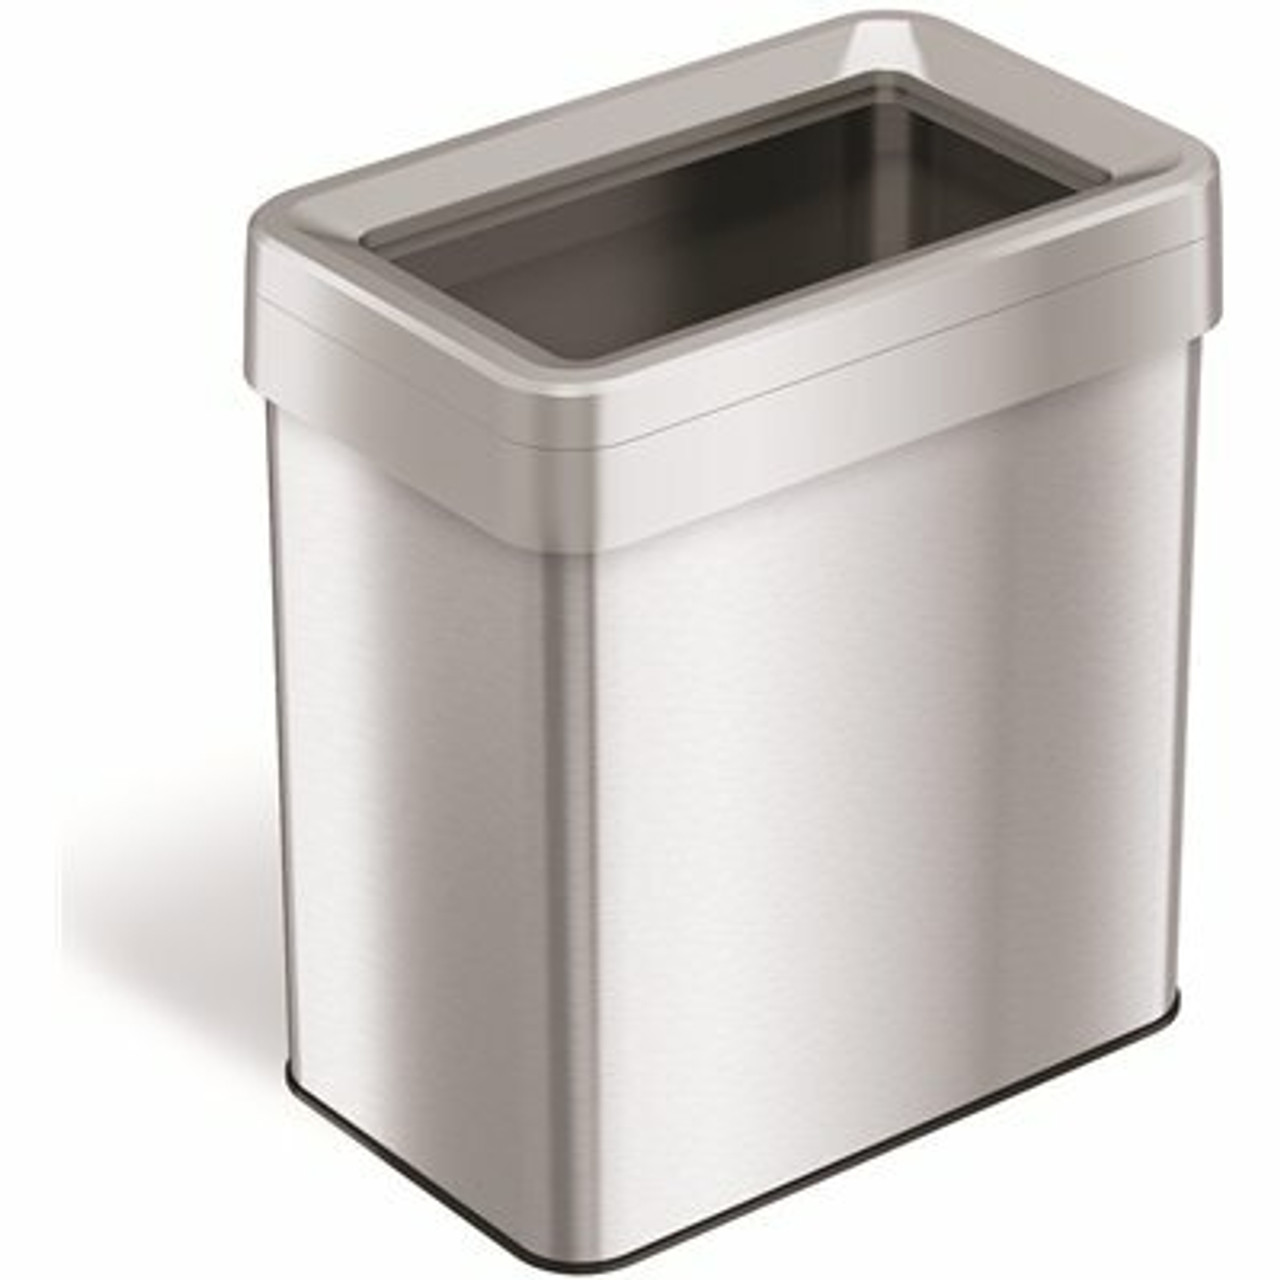 Hls Commercial 16 Gal. Rectangular Open Top Stainless Steel Trash Can With Odor Filters